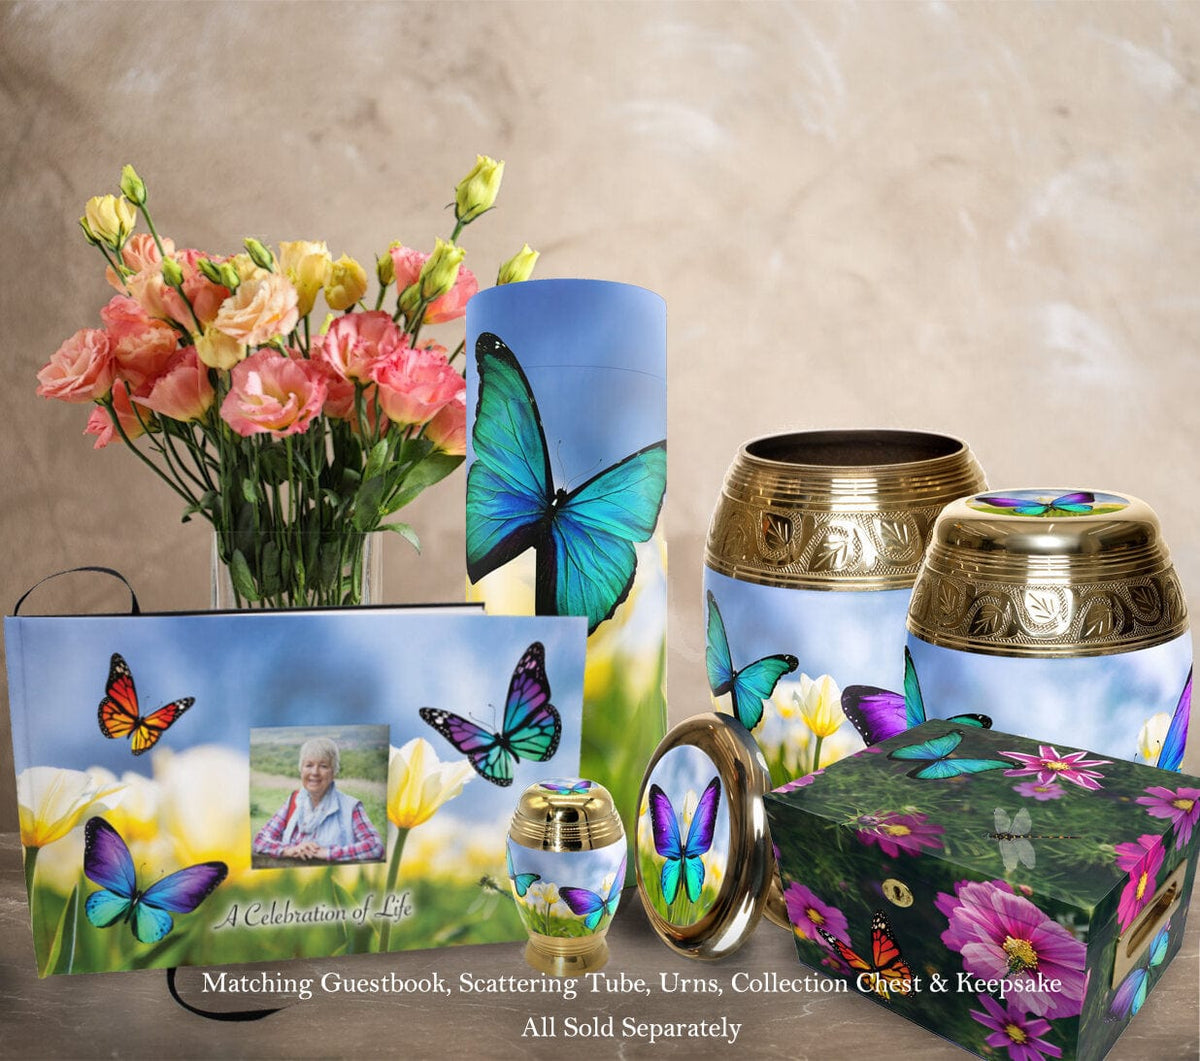 Commemorative Cremation Urns Wild Butterflies Matching Themed &#39;Celebration of Life&#39; Guest Book for Funeral or Memorial Service